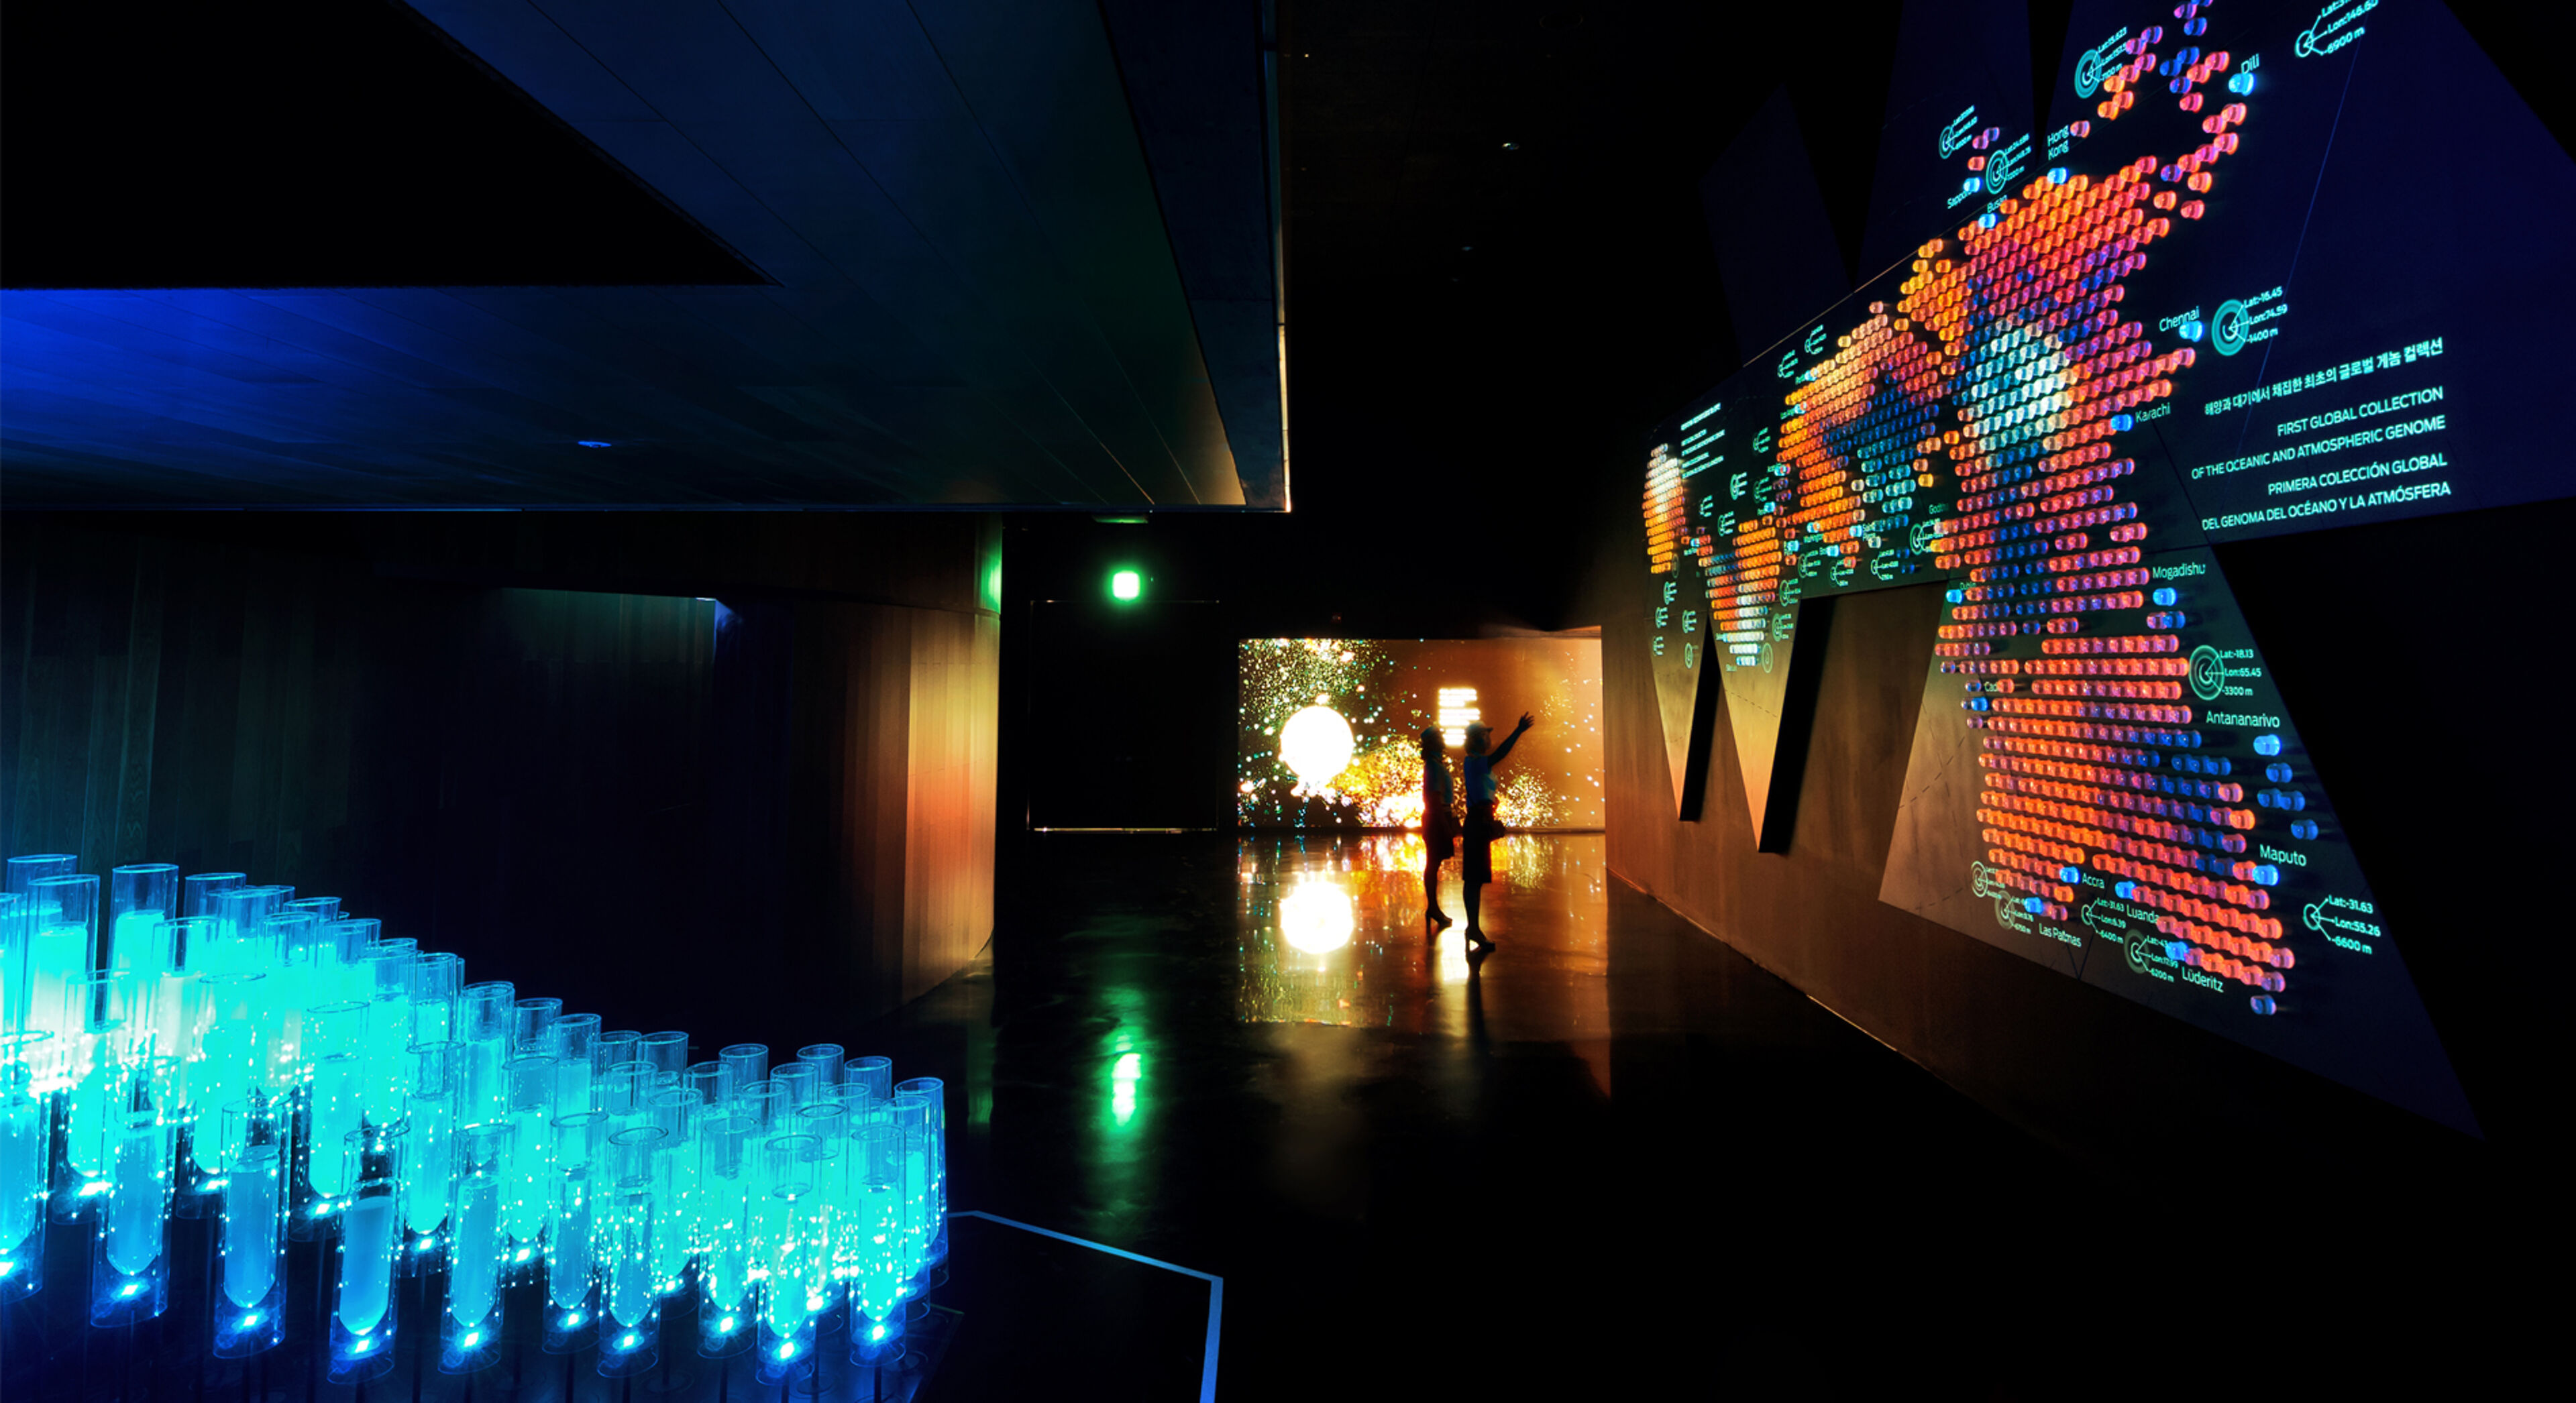  A dark room illuminated by an interactive light installation with vibrant visual displays and a silhouette of a person engaging with the exhibit.